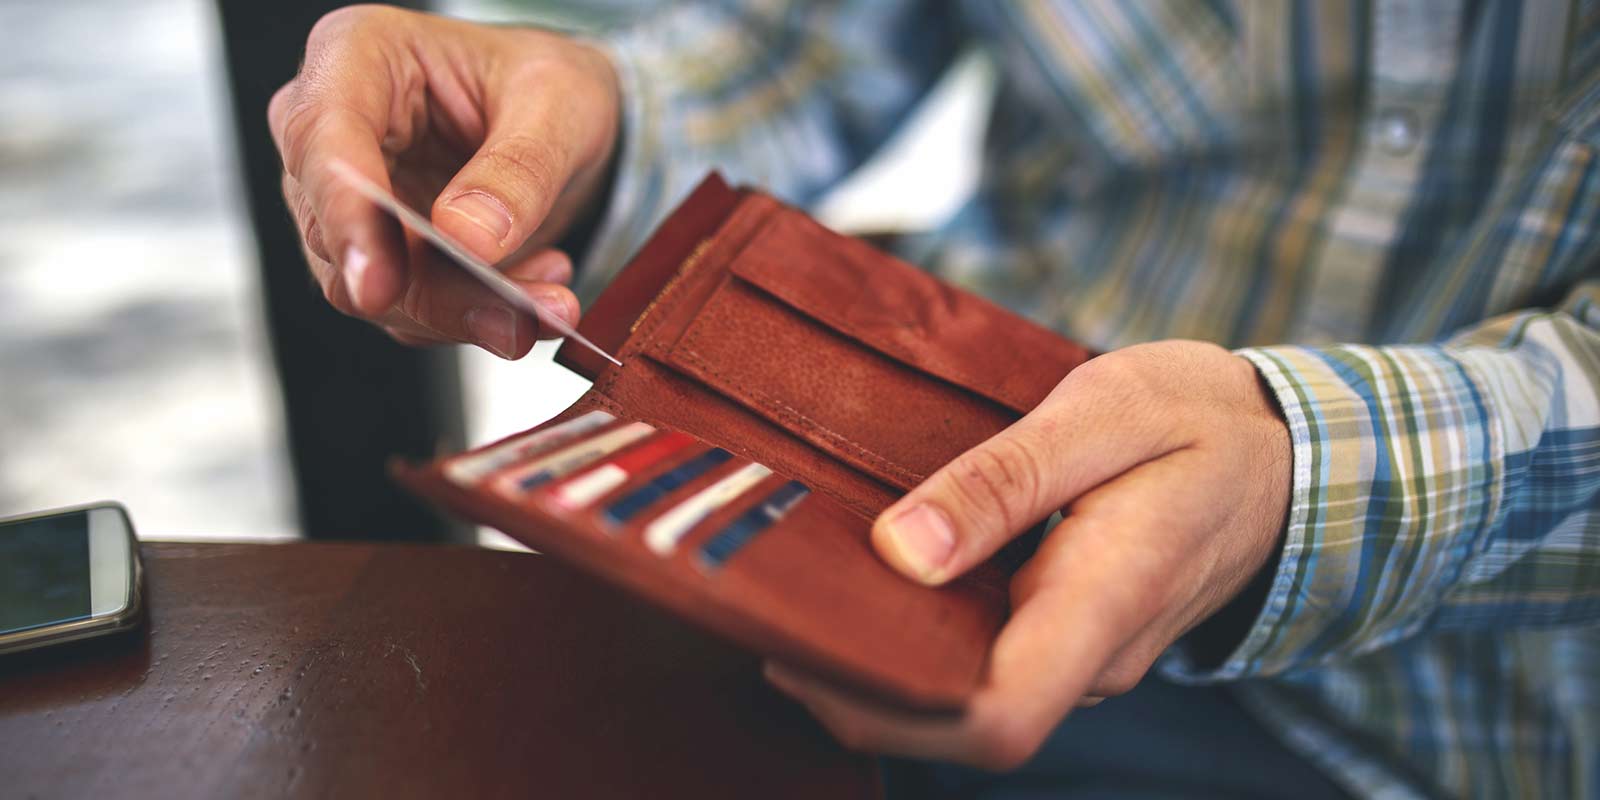 A man pulls a credit or debit card out of his leather wallet.